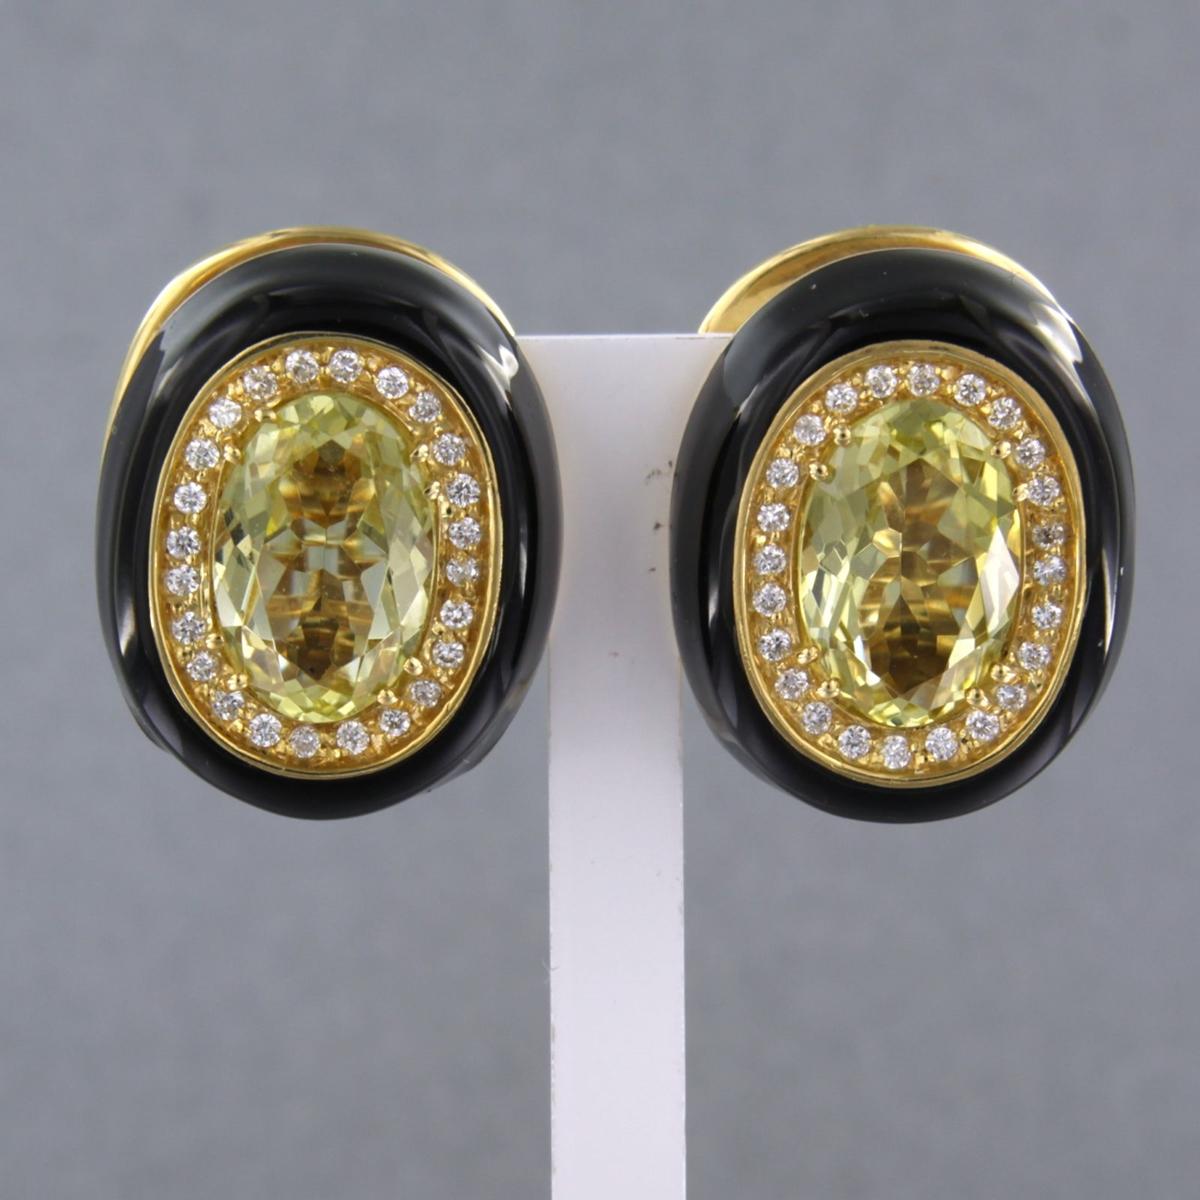 18k yellow gold ear clips set with citrine and brilliant cut diamonds. 0.60ct - F/G - VS/SI

detailed description:

the size of the ear clip is 2.1 cm long by 1.7 cm wide

weight 25.8 grams

occupied with

- 2 x 1.2 cm x 8.0 mm oval facet cut